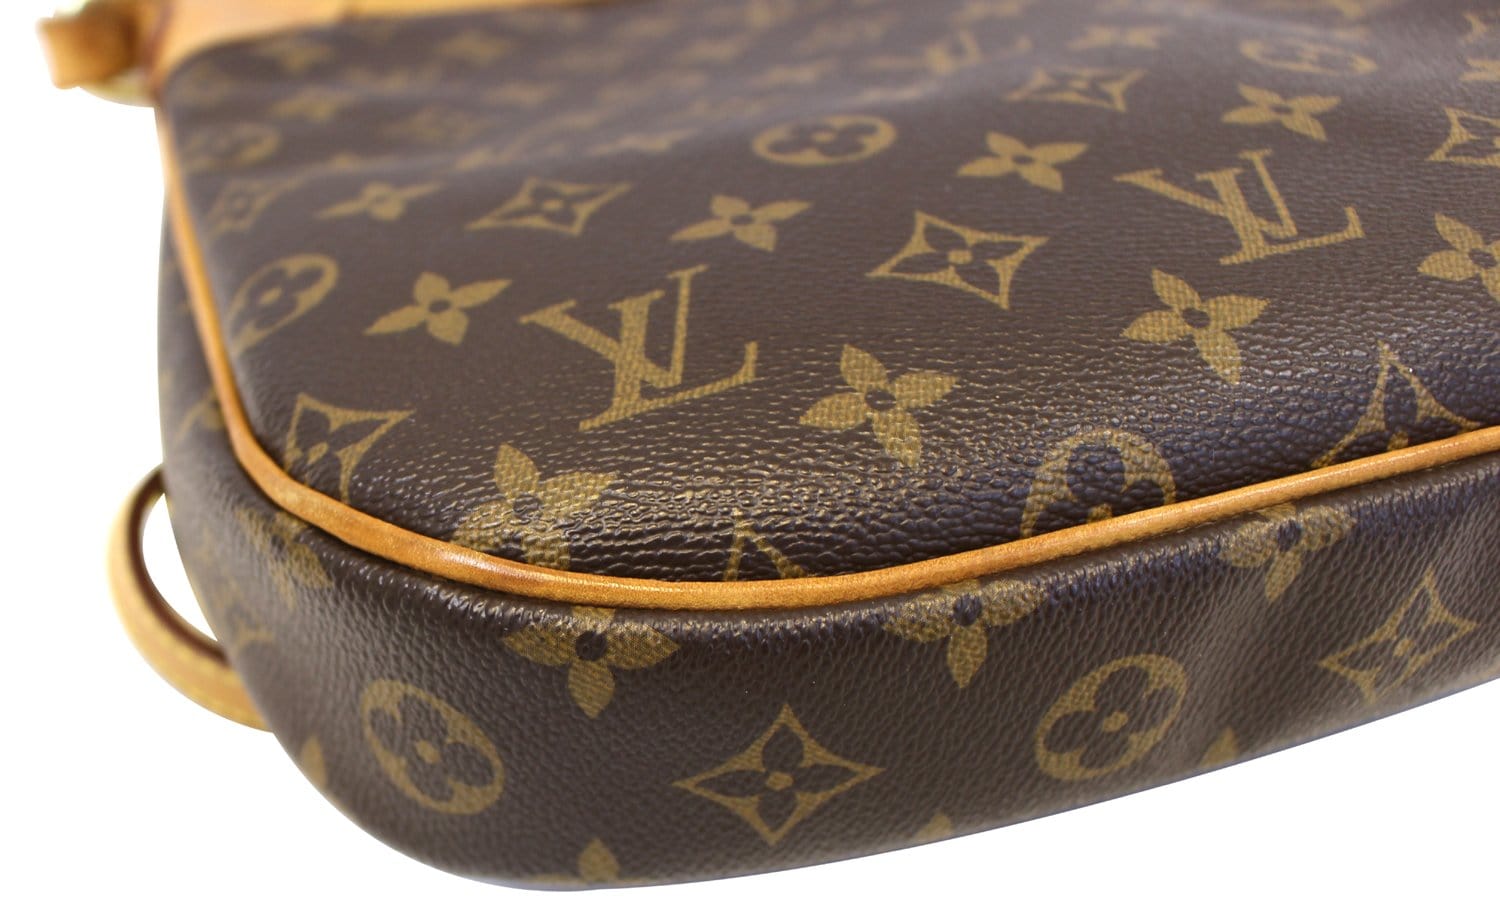 Louis Vuitton 2010 Pre-Owned Monogram Odeon PM Bag - Brown for Women